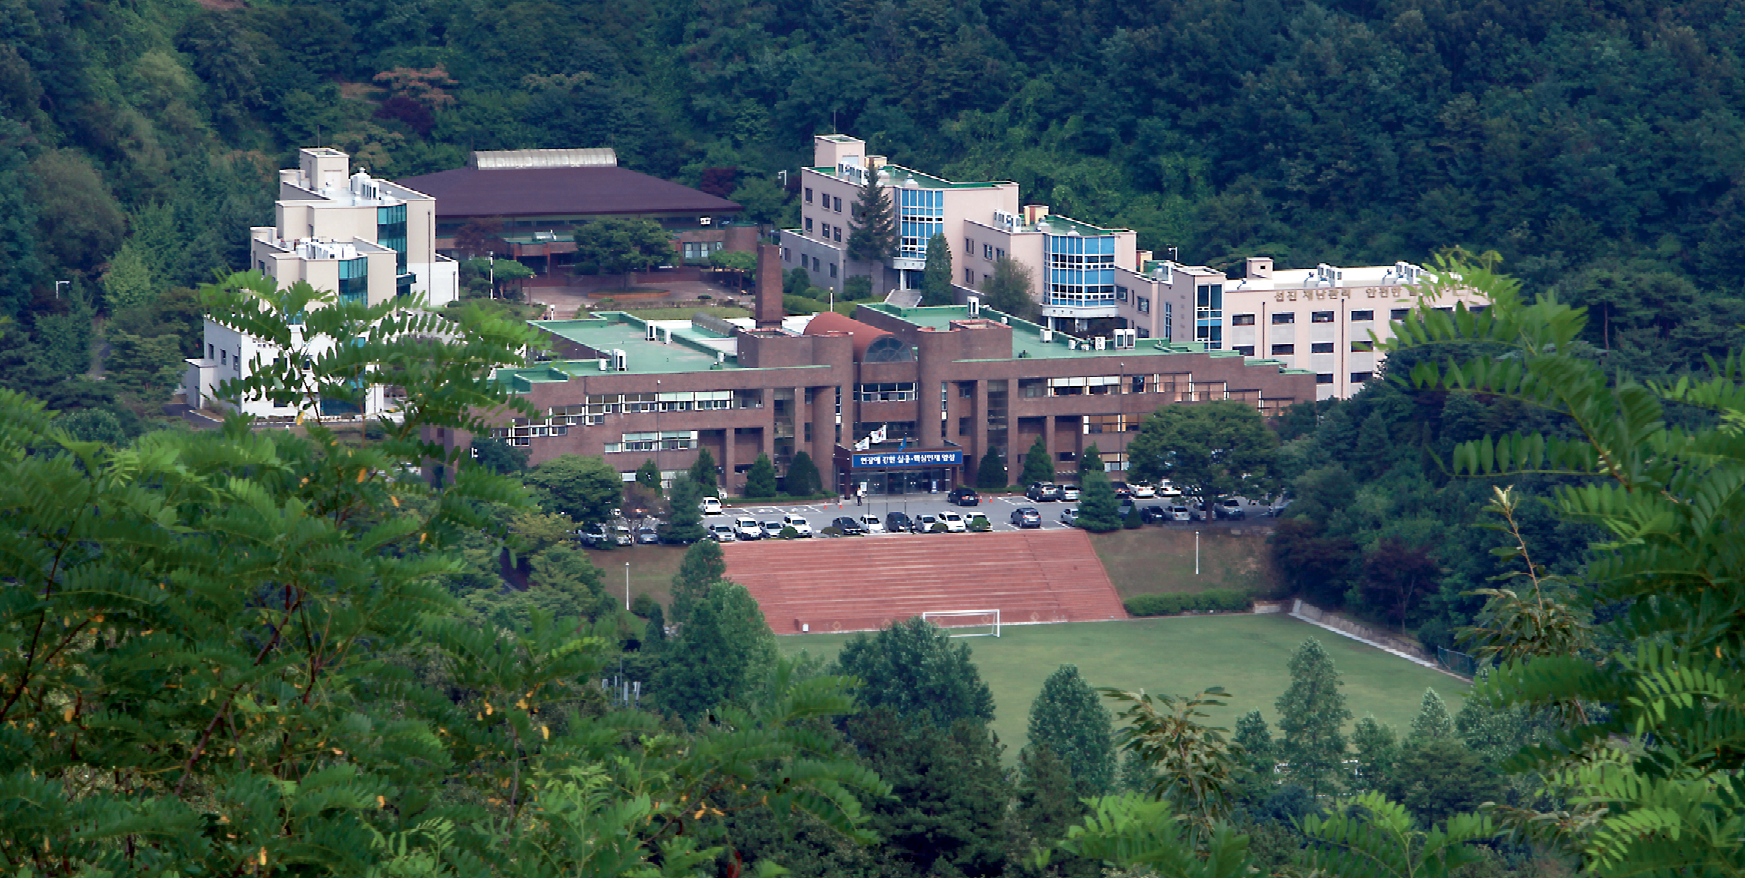 A photograph of the National Disaster Management Institute and National Fire Service Academy campus in the Republic of Korea. The buildings are brown and white, with steps leading down to a green sporting field. Lush green plants and trees surround the buildings.